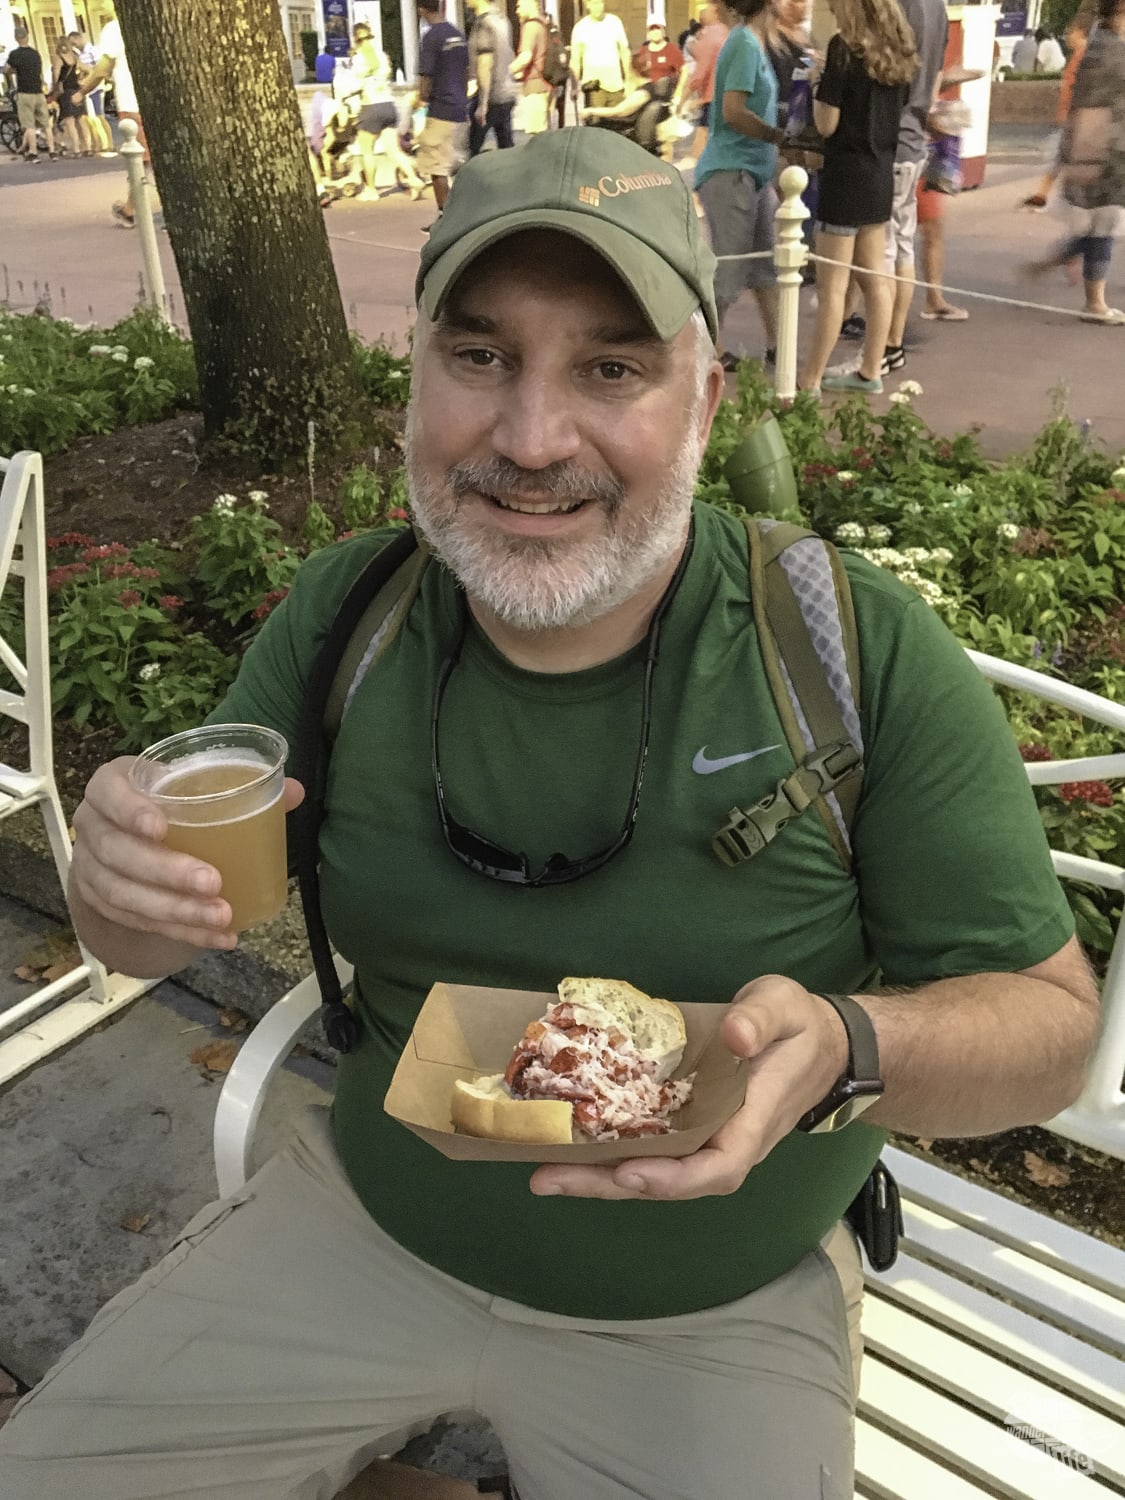 New England Lobster Roll at the Food & Wine Festival